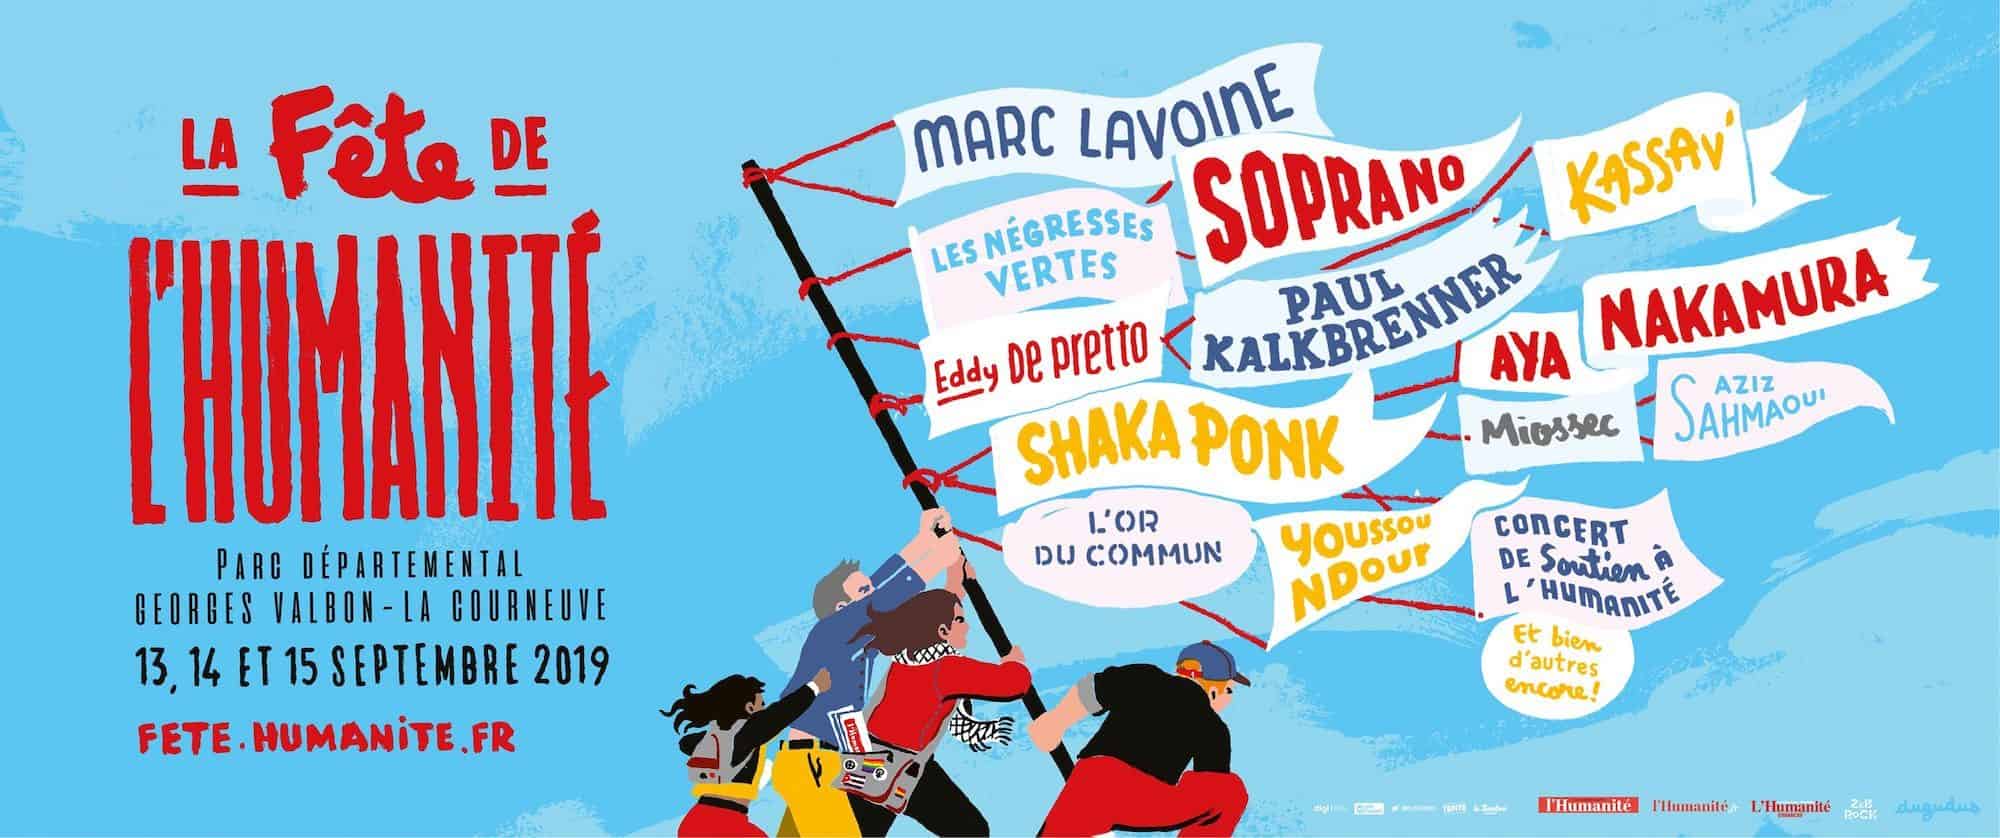 An illustrated poster for Fete de l'Humanité, showing people flying flags with the names of the musicians lined up to perform a the festival.